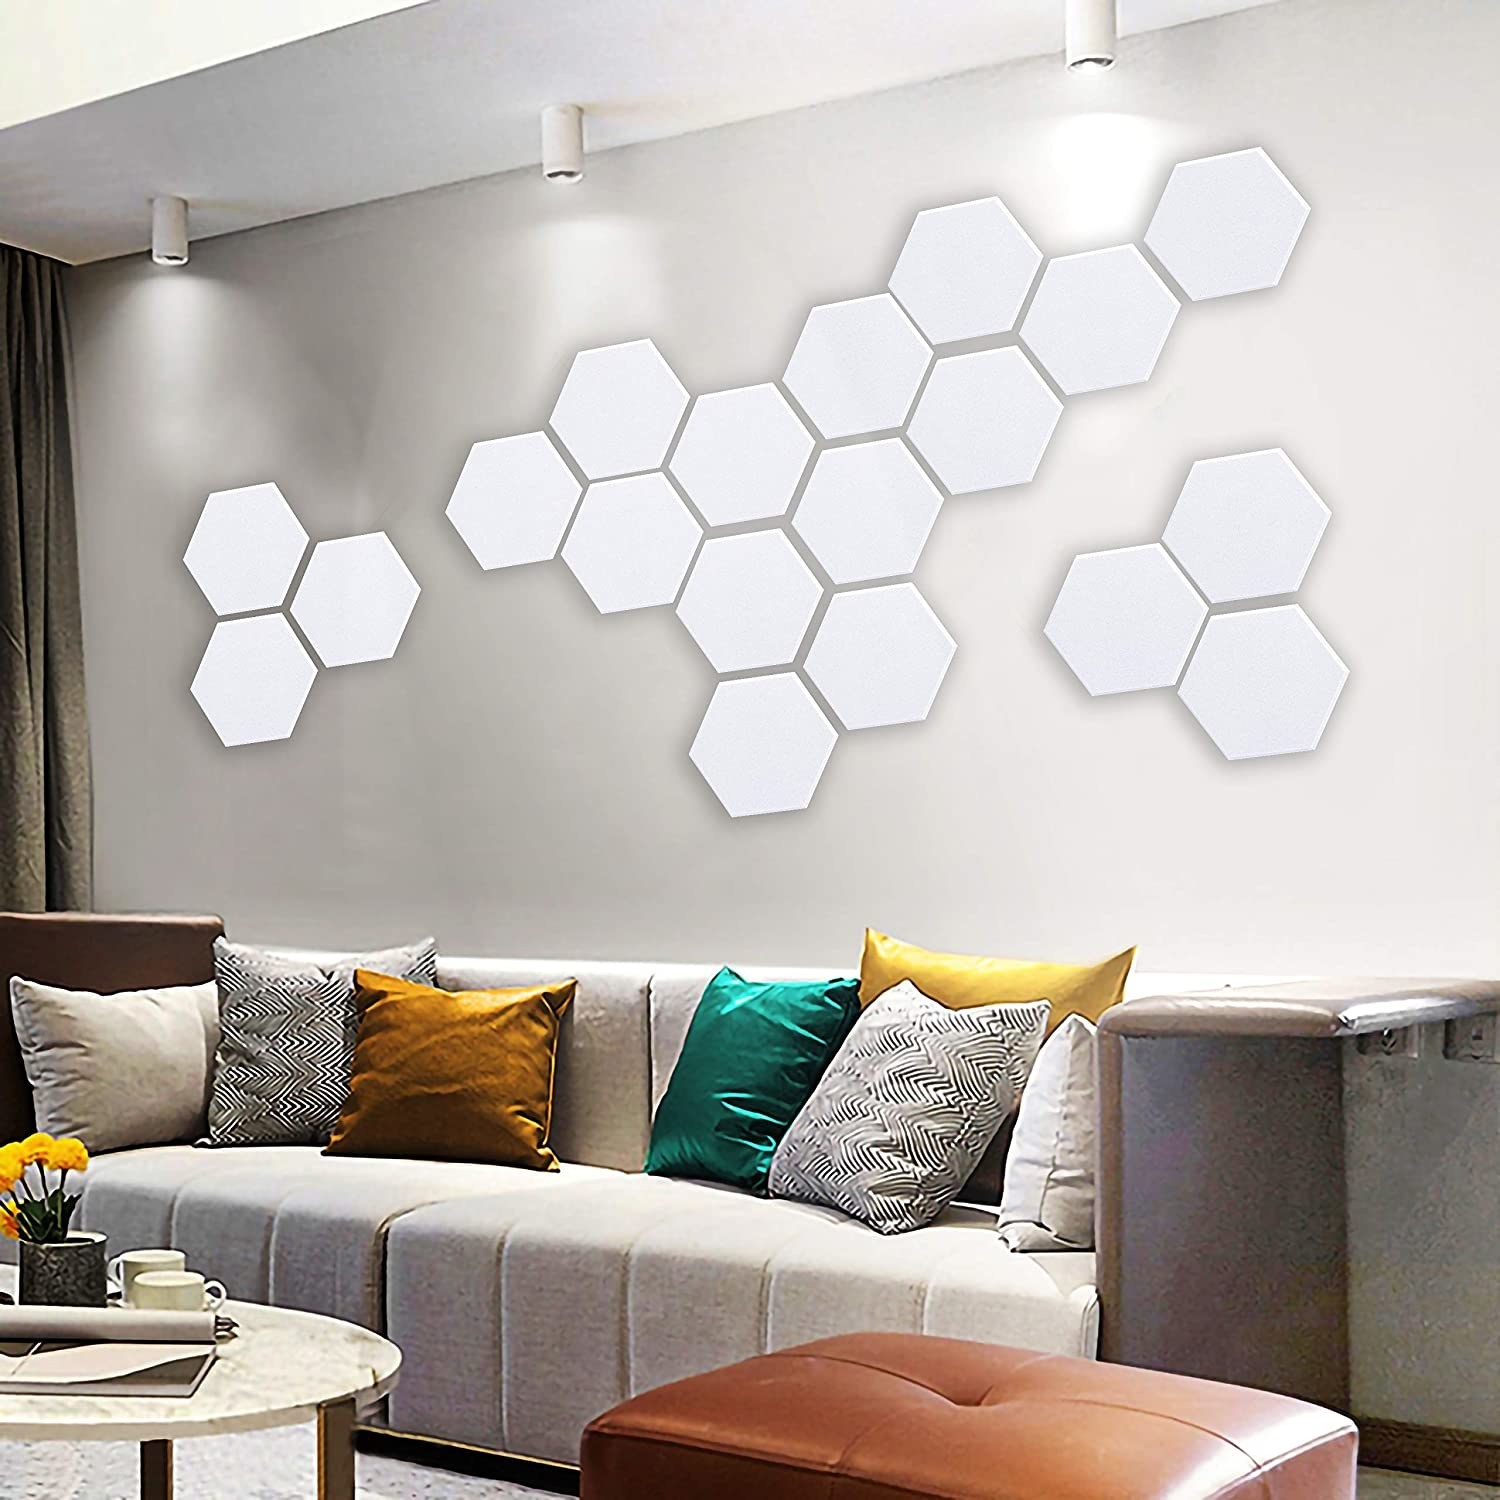 a set of hexagonal soundproofing panels mounted on a wall above a sofa